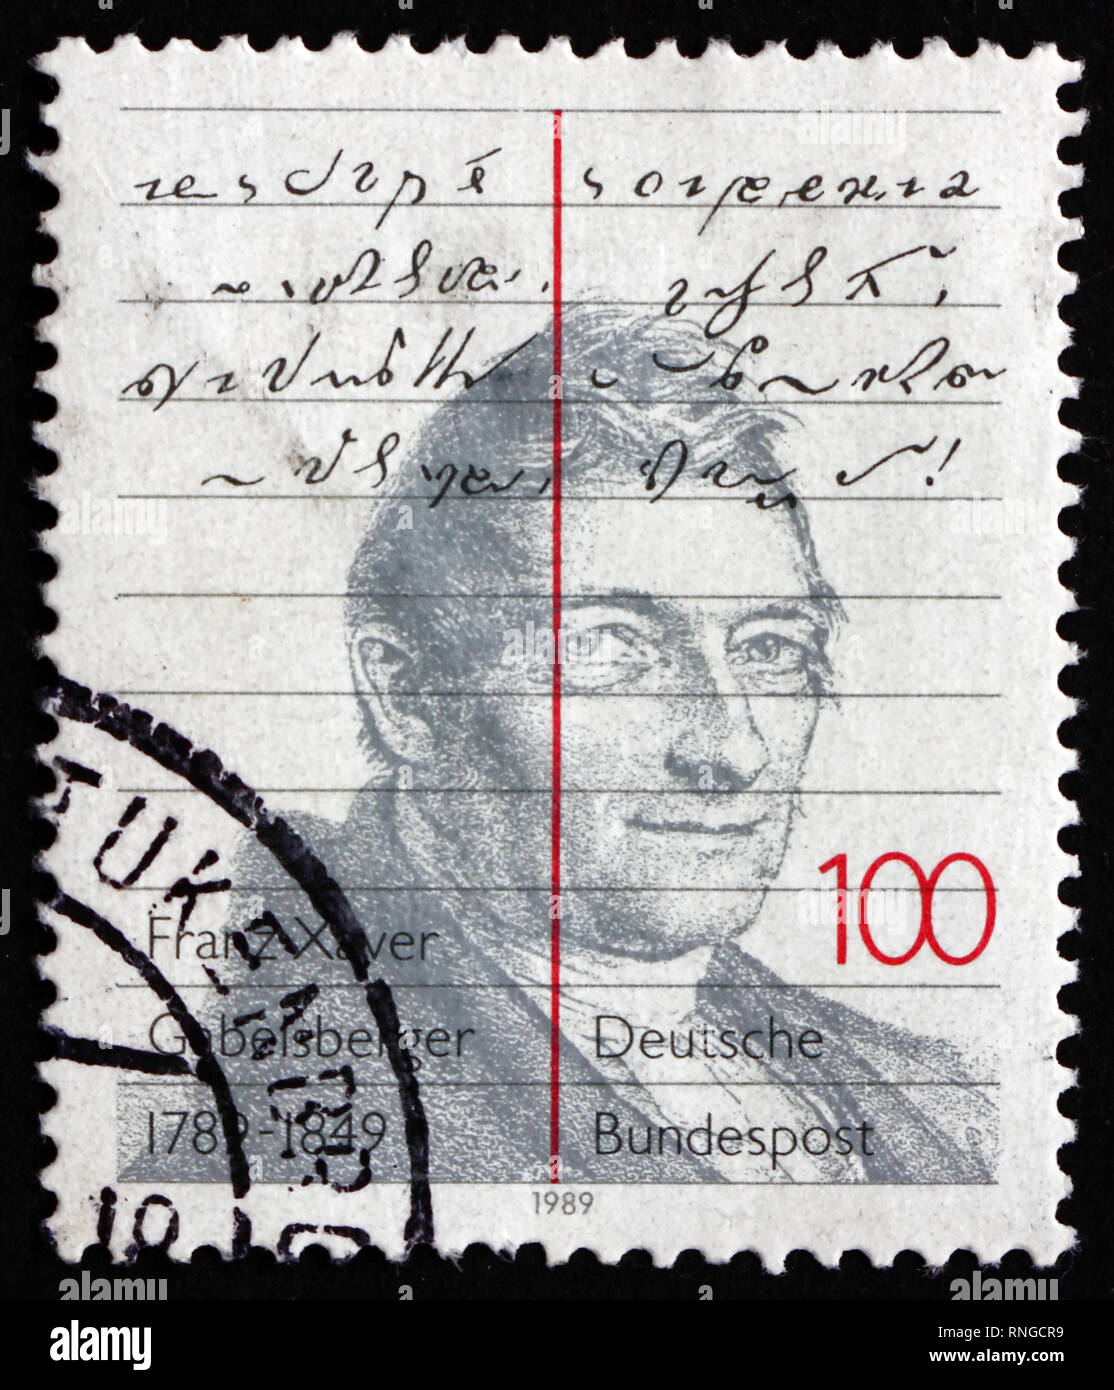 GERMANY - CIRCA 1989: a stamp printed in the Germany shows Franz Xaver Gabelsberger, Inventor of a Shorthand Writing System, circa 1989 Stock Photo